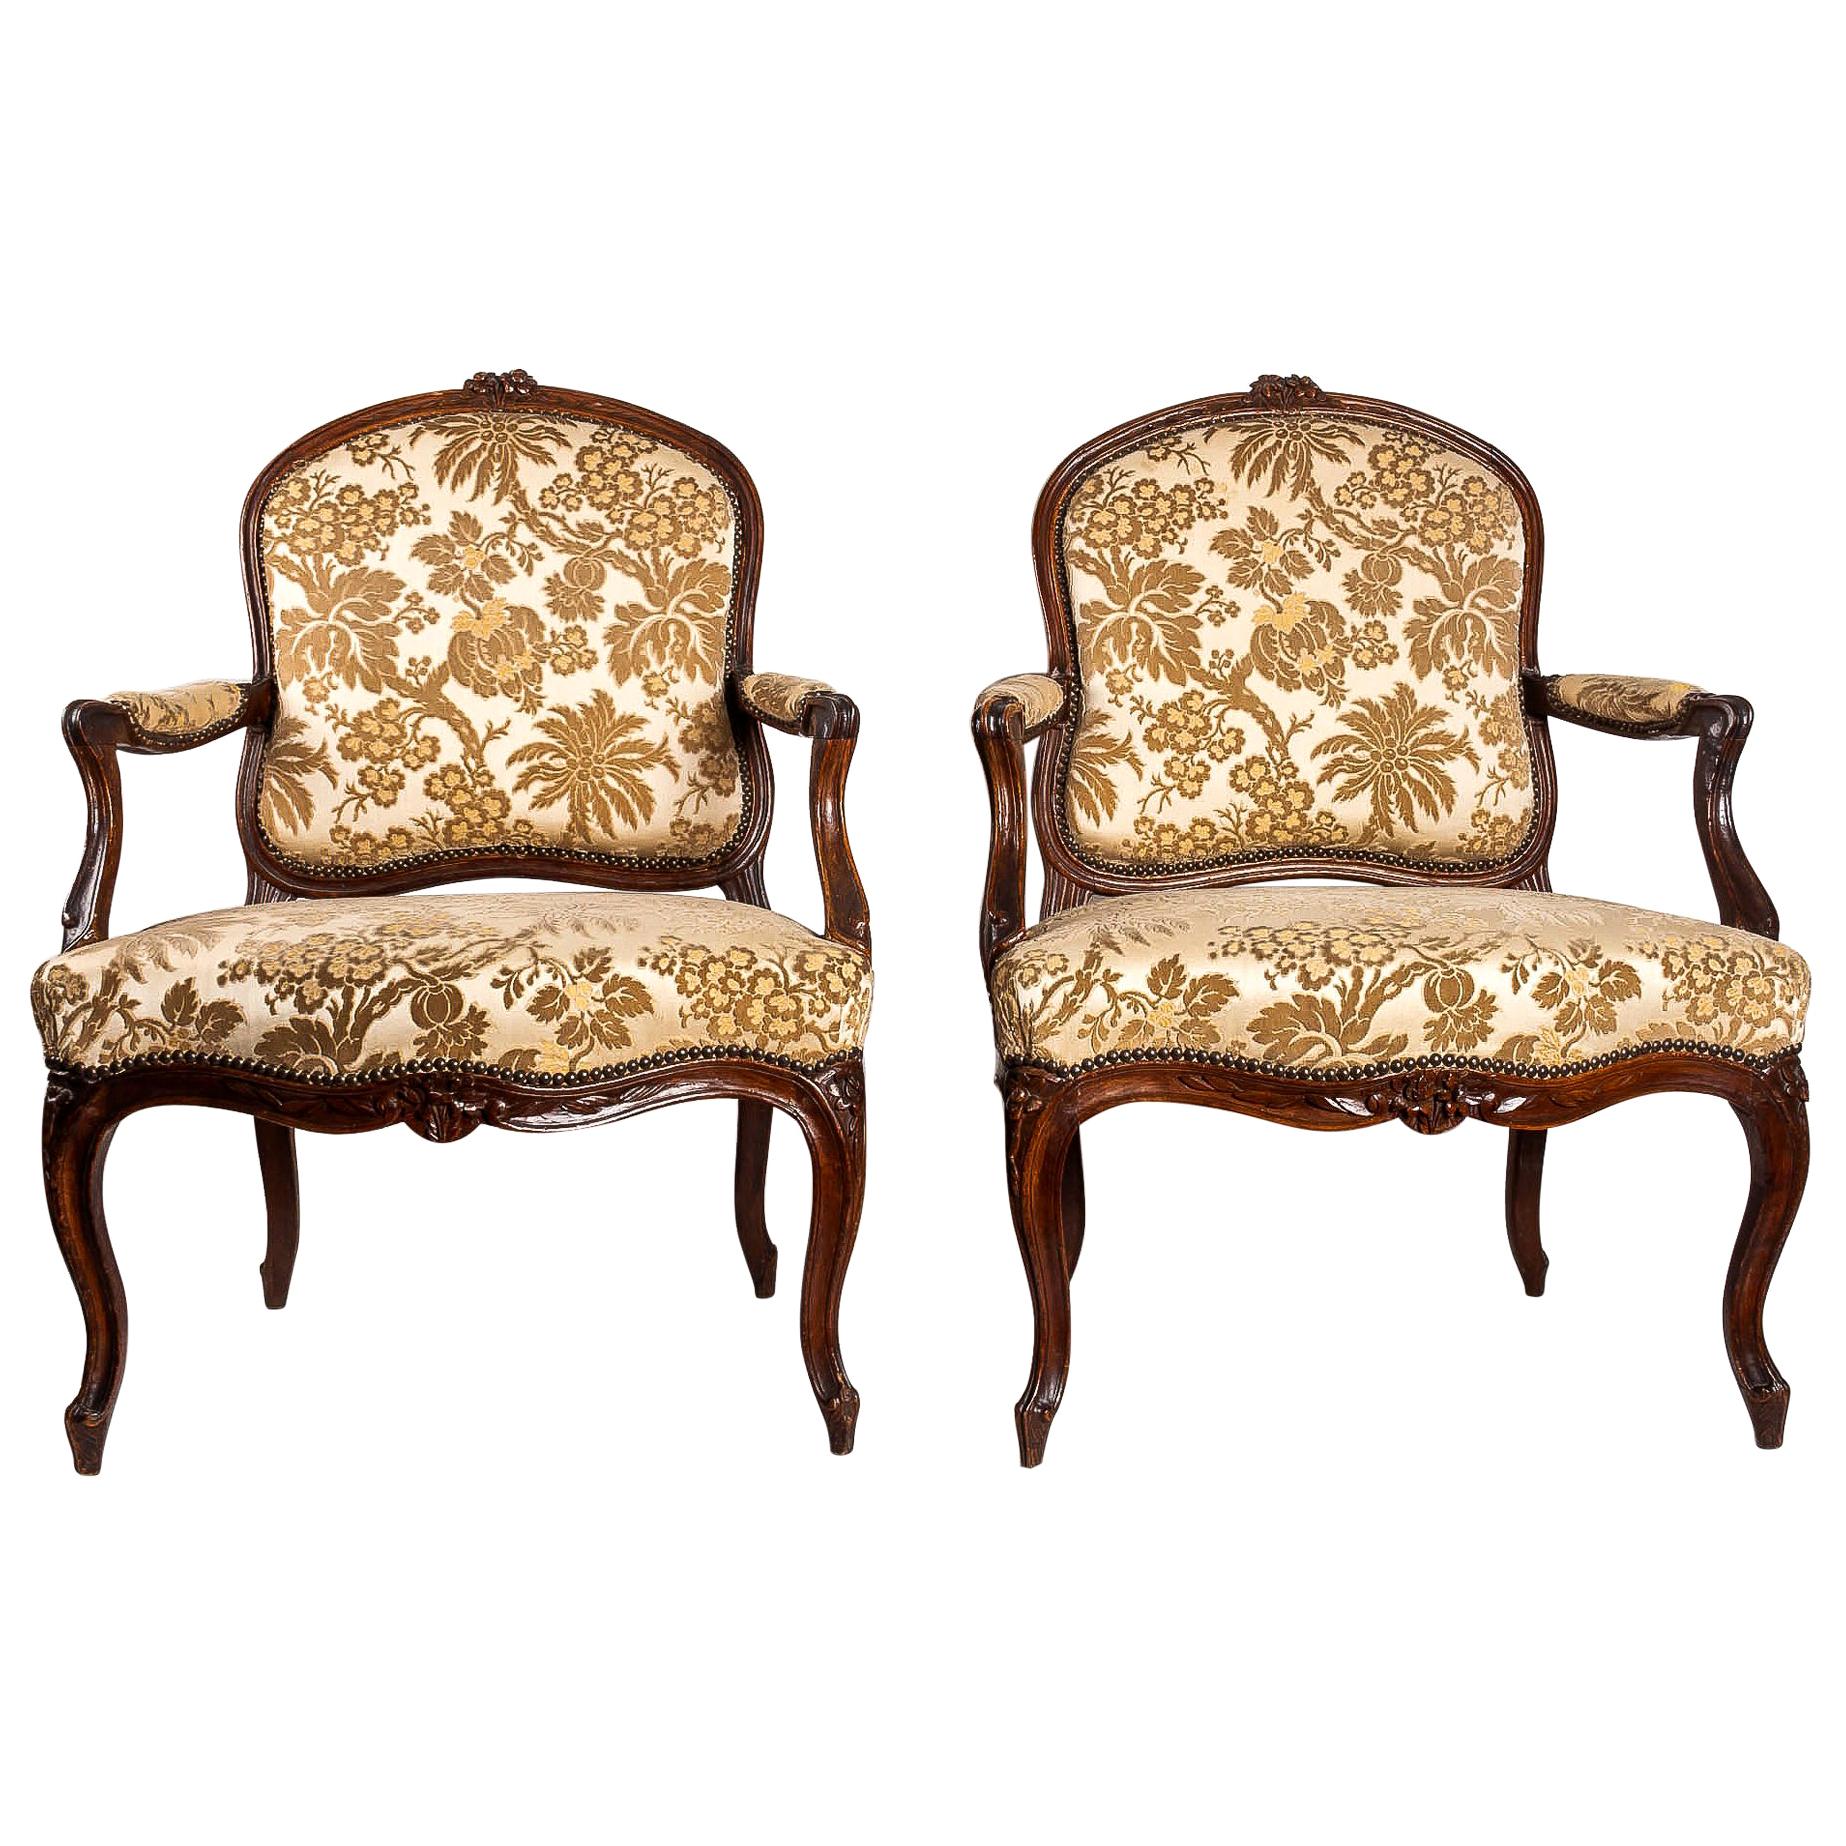 Stamped by Martin Jardin Pair of Large Louis XV Walnut Armchairs, circa 1760 For Sale